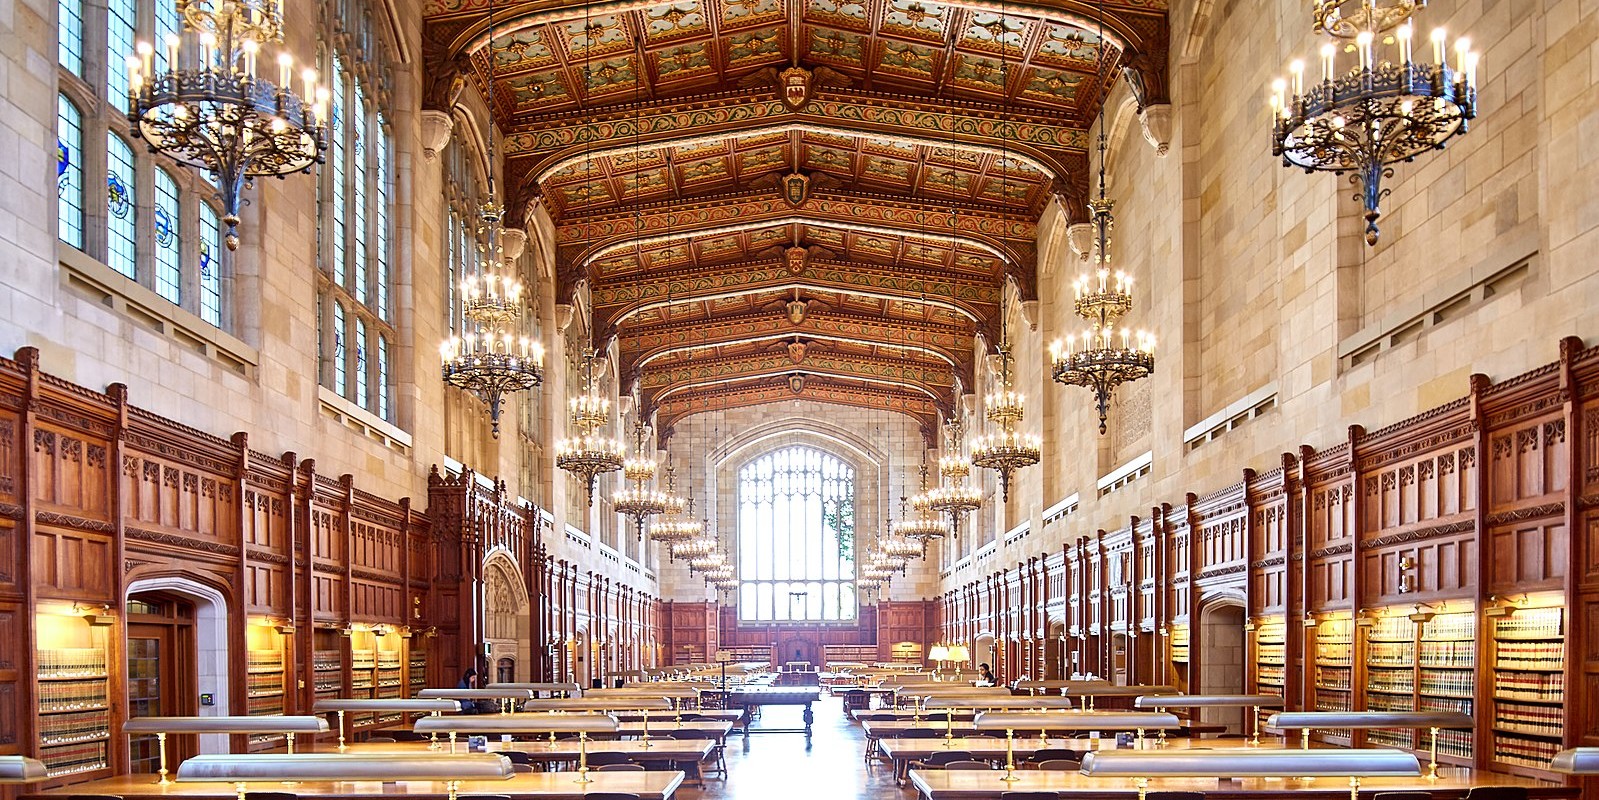 University of Michigan Law Library. Photo: Wikicommons/Cadop